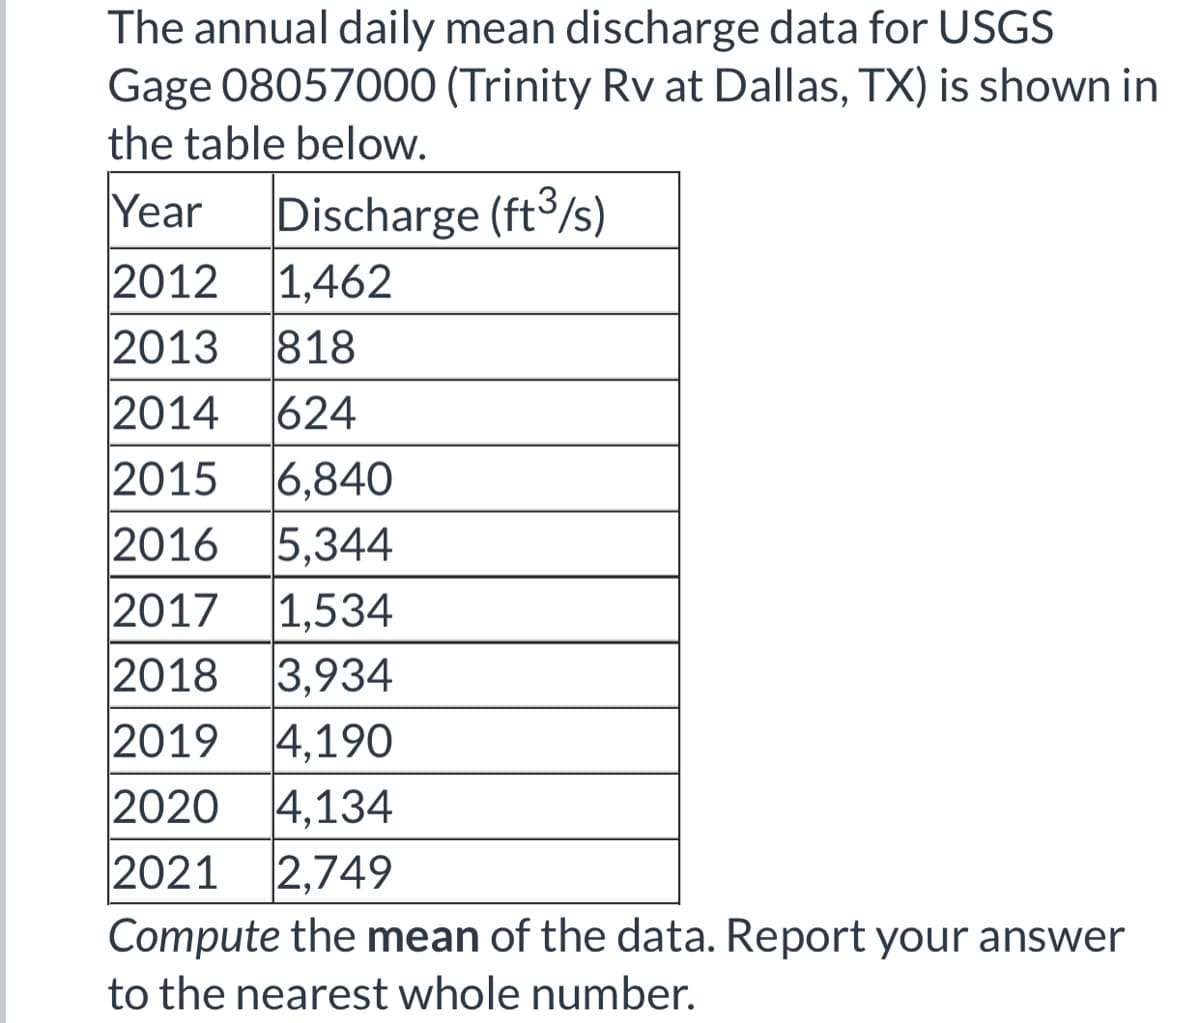 The annual daily mean discharge data for USGS
08057000 (Trinity Rv at Dallas, TX) is shown in
the table below.
Gage
Year Discharge (ft3/s)
2012 1,462
2013 818
2014 624
2015 6,840
2016 5,344
2017 1,534
2018 3,934
2019 4,190
2020 4,134
2021 2,749
Compute the mean of the data. Report your answer
to the nearest whole number.